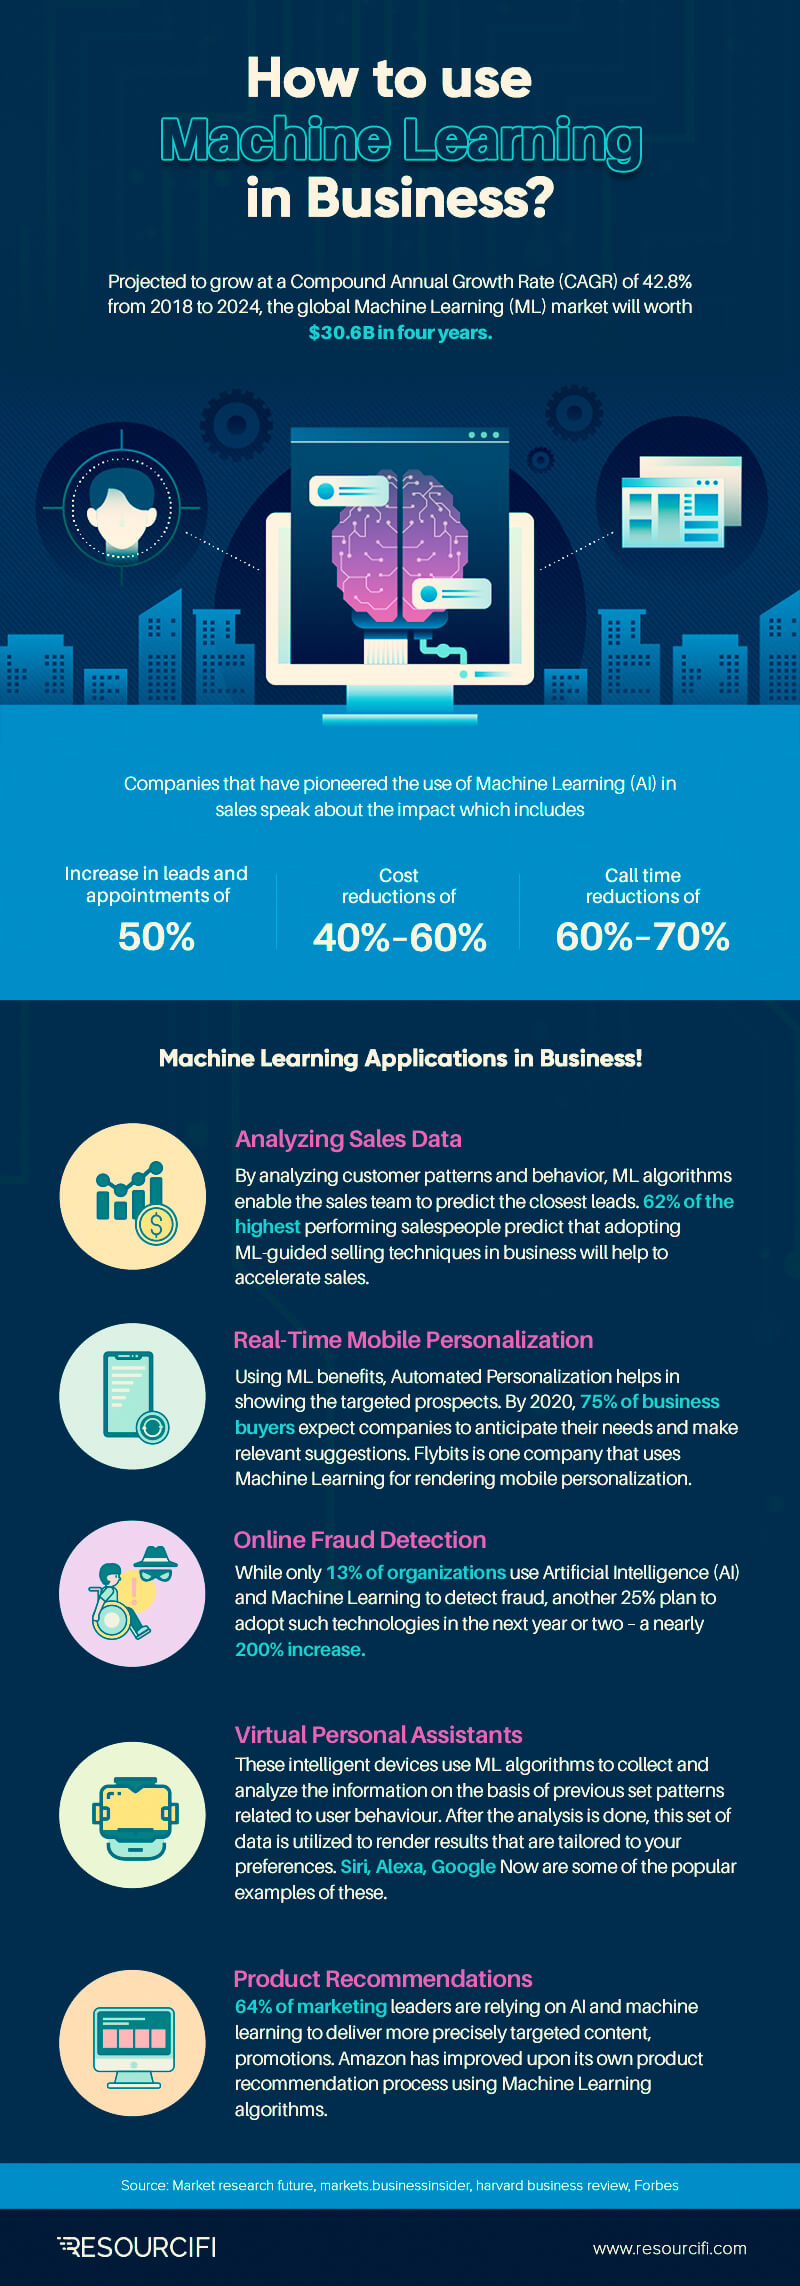 Machine Learning Applications in Business